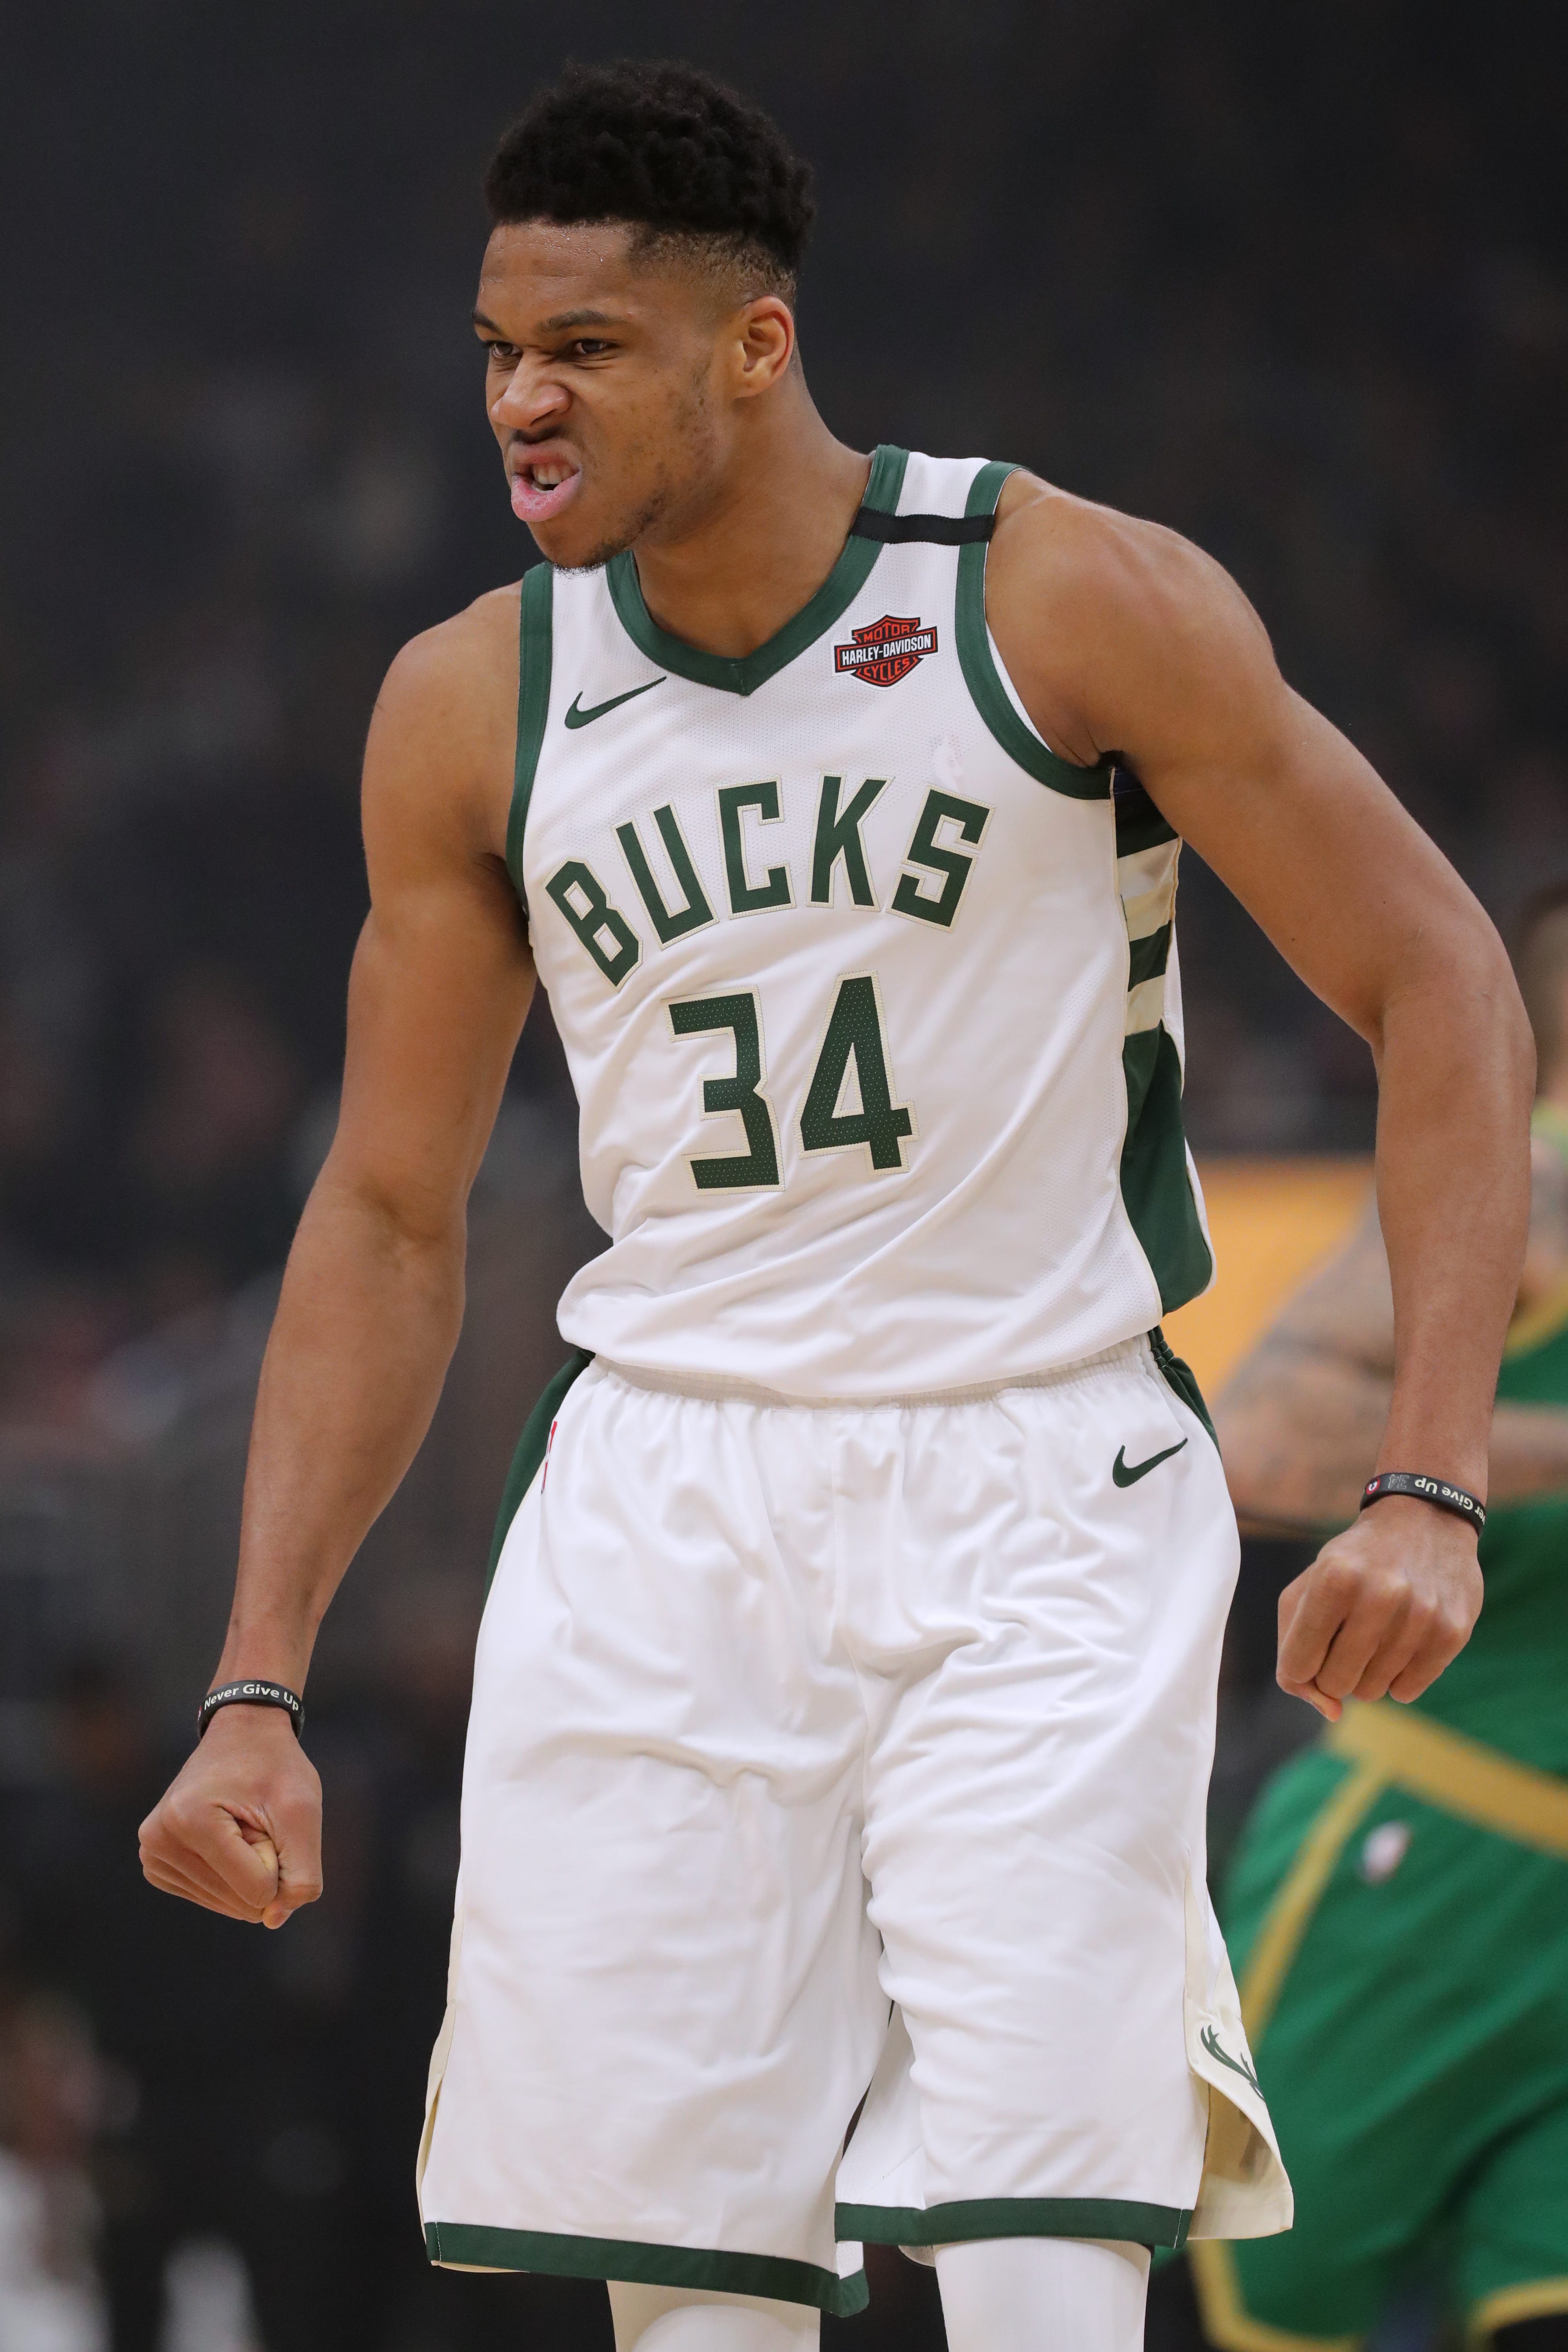 Giannis jersey sales reach No. 2, just 